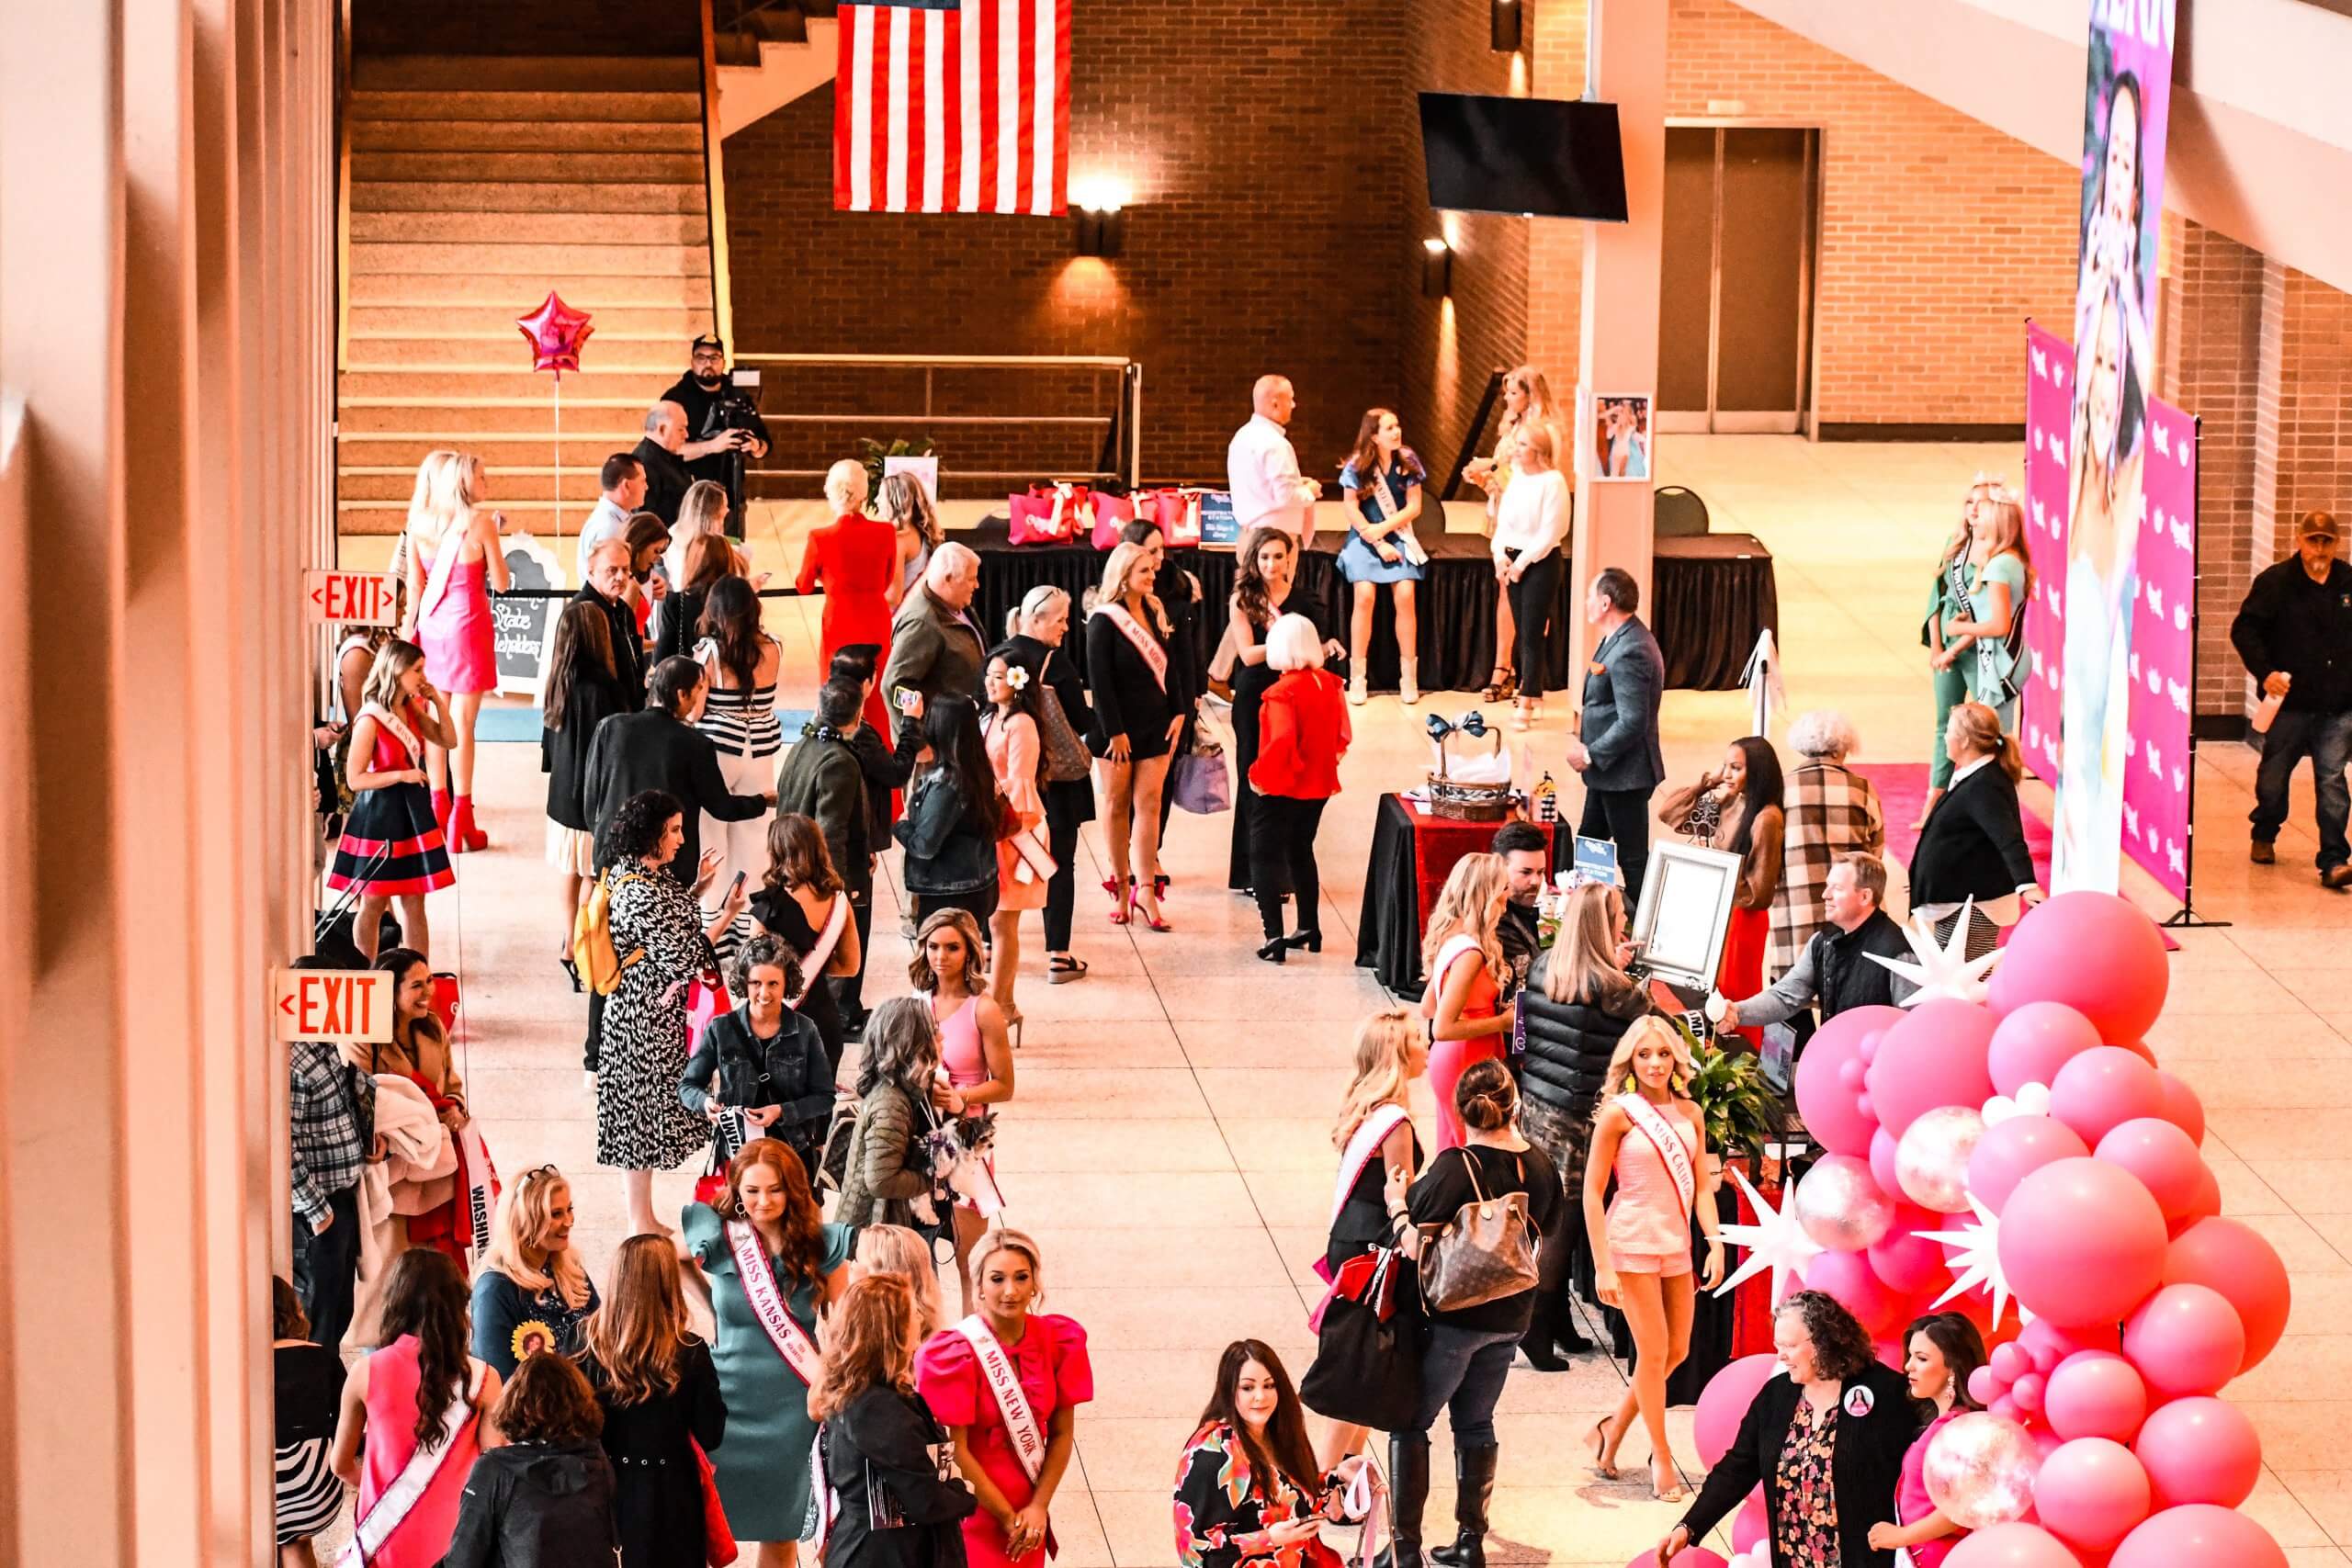 The Carl Perkins Civic Center lobby full of nerves and excitement as the 40 teen contestants vying for the title of Miss Teen Volunteer America went through registration.